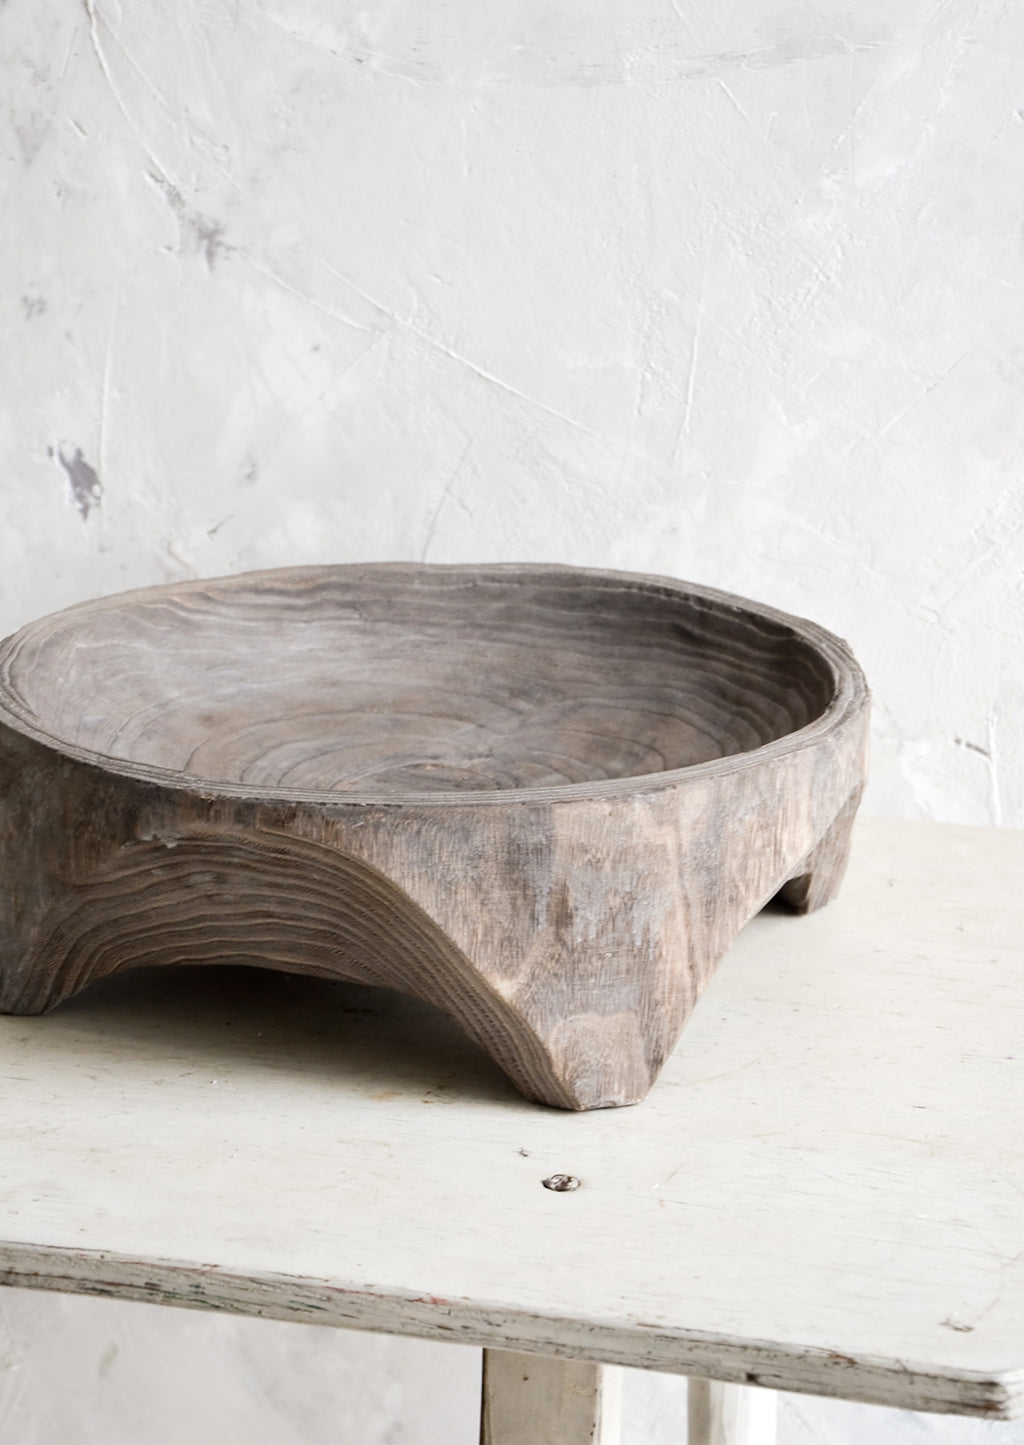 2: Round, primitive style shallow wooden display bowl with chunky footed base